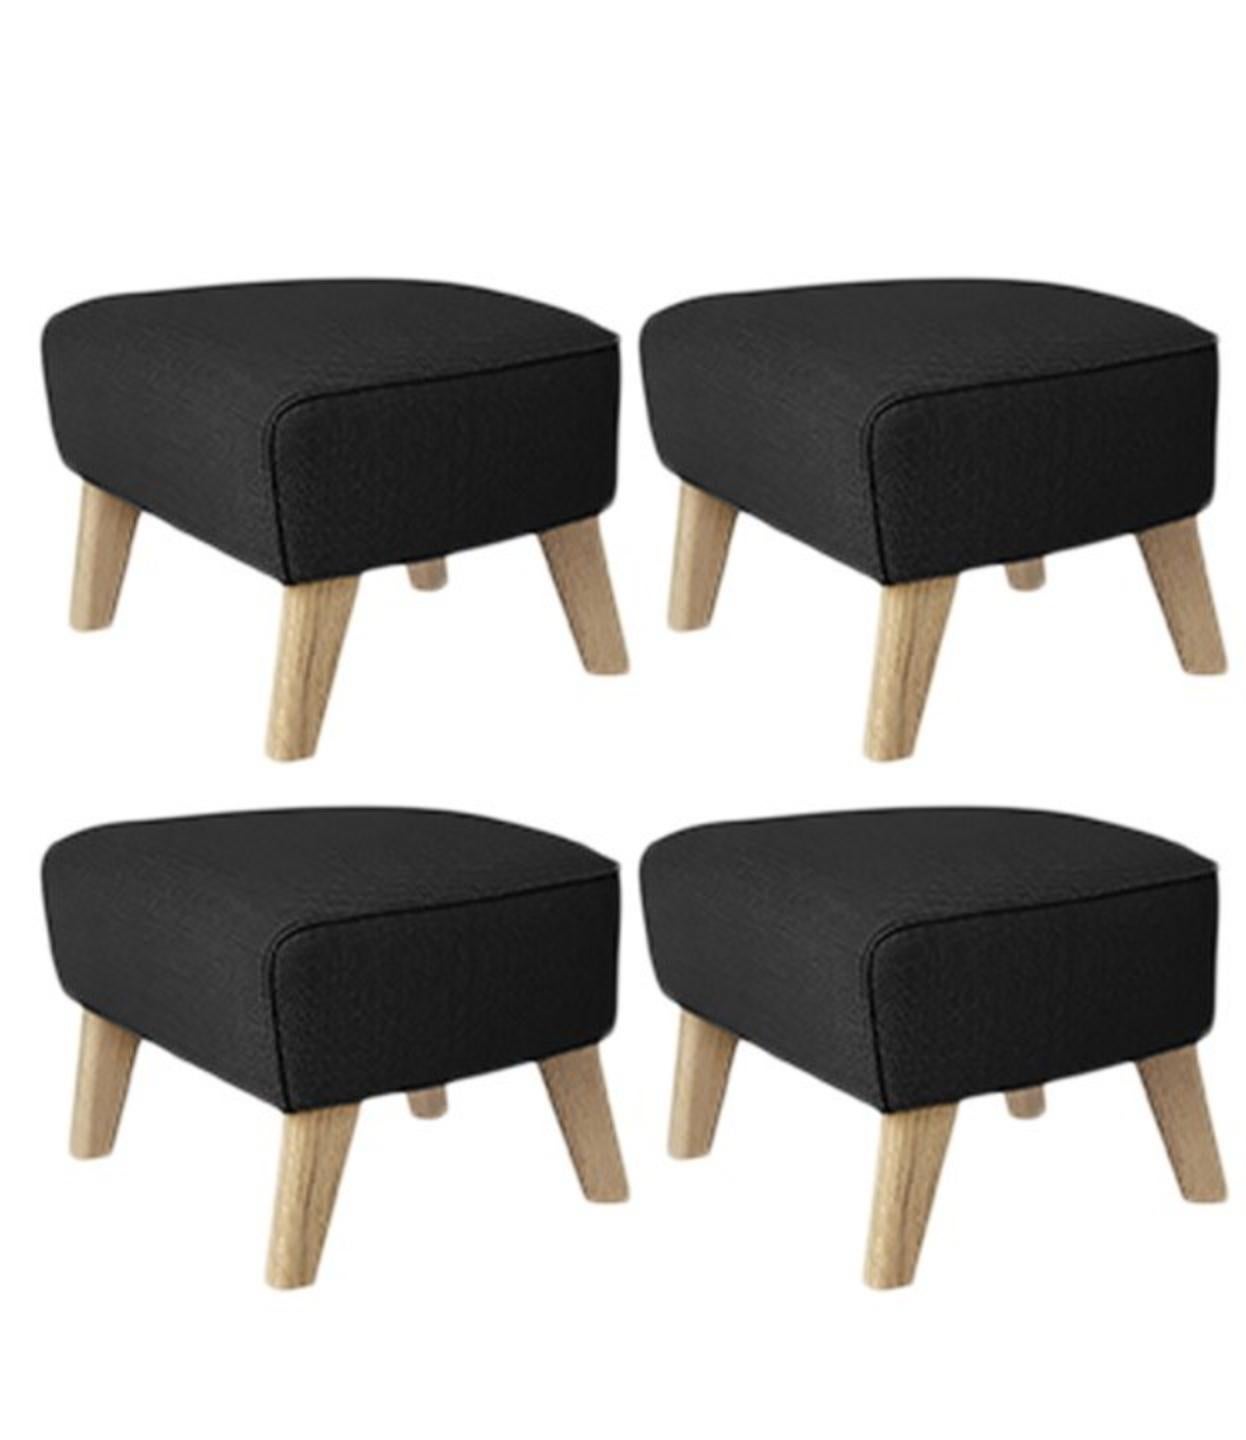 Set of 4 dark grey, natural oak RafSimonsVidar3 My Own Chair Footstool by Lassen
Dimensions: W 56 x D 58 x H 40 cm 
Materials: textile, oak
Also available: other colors available.

The My Own Chair Footstool has been designed in the same spirit